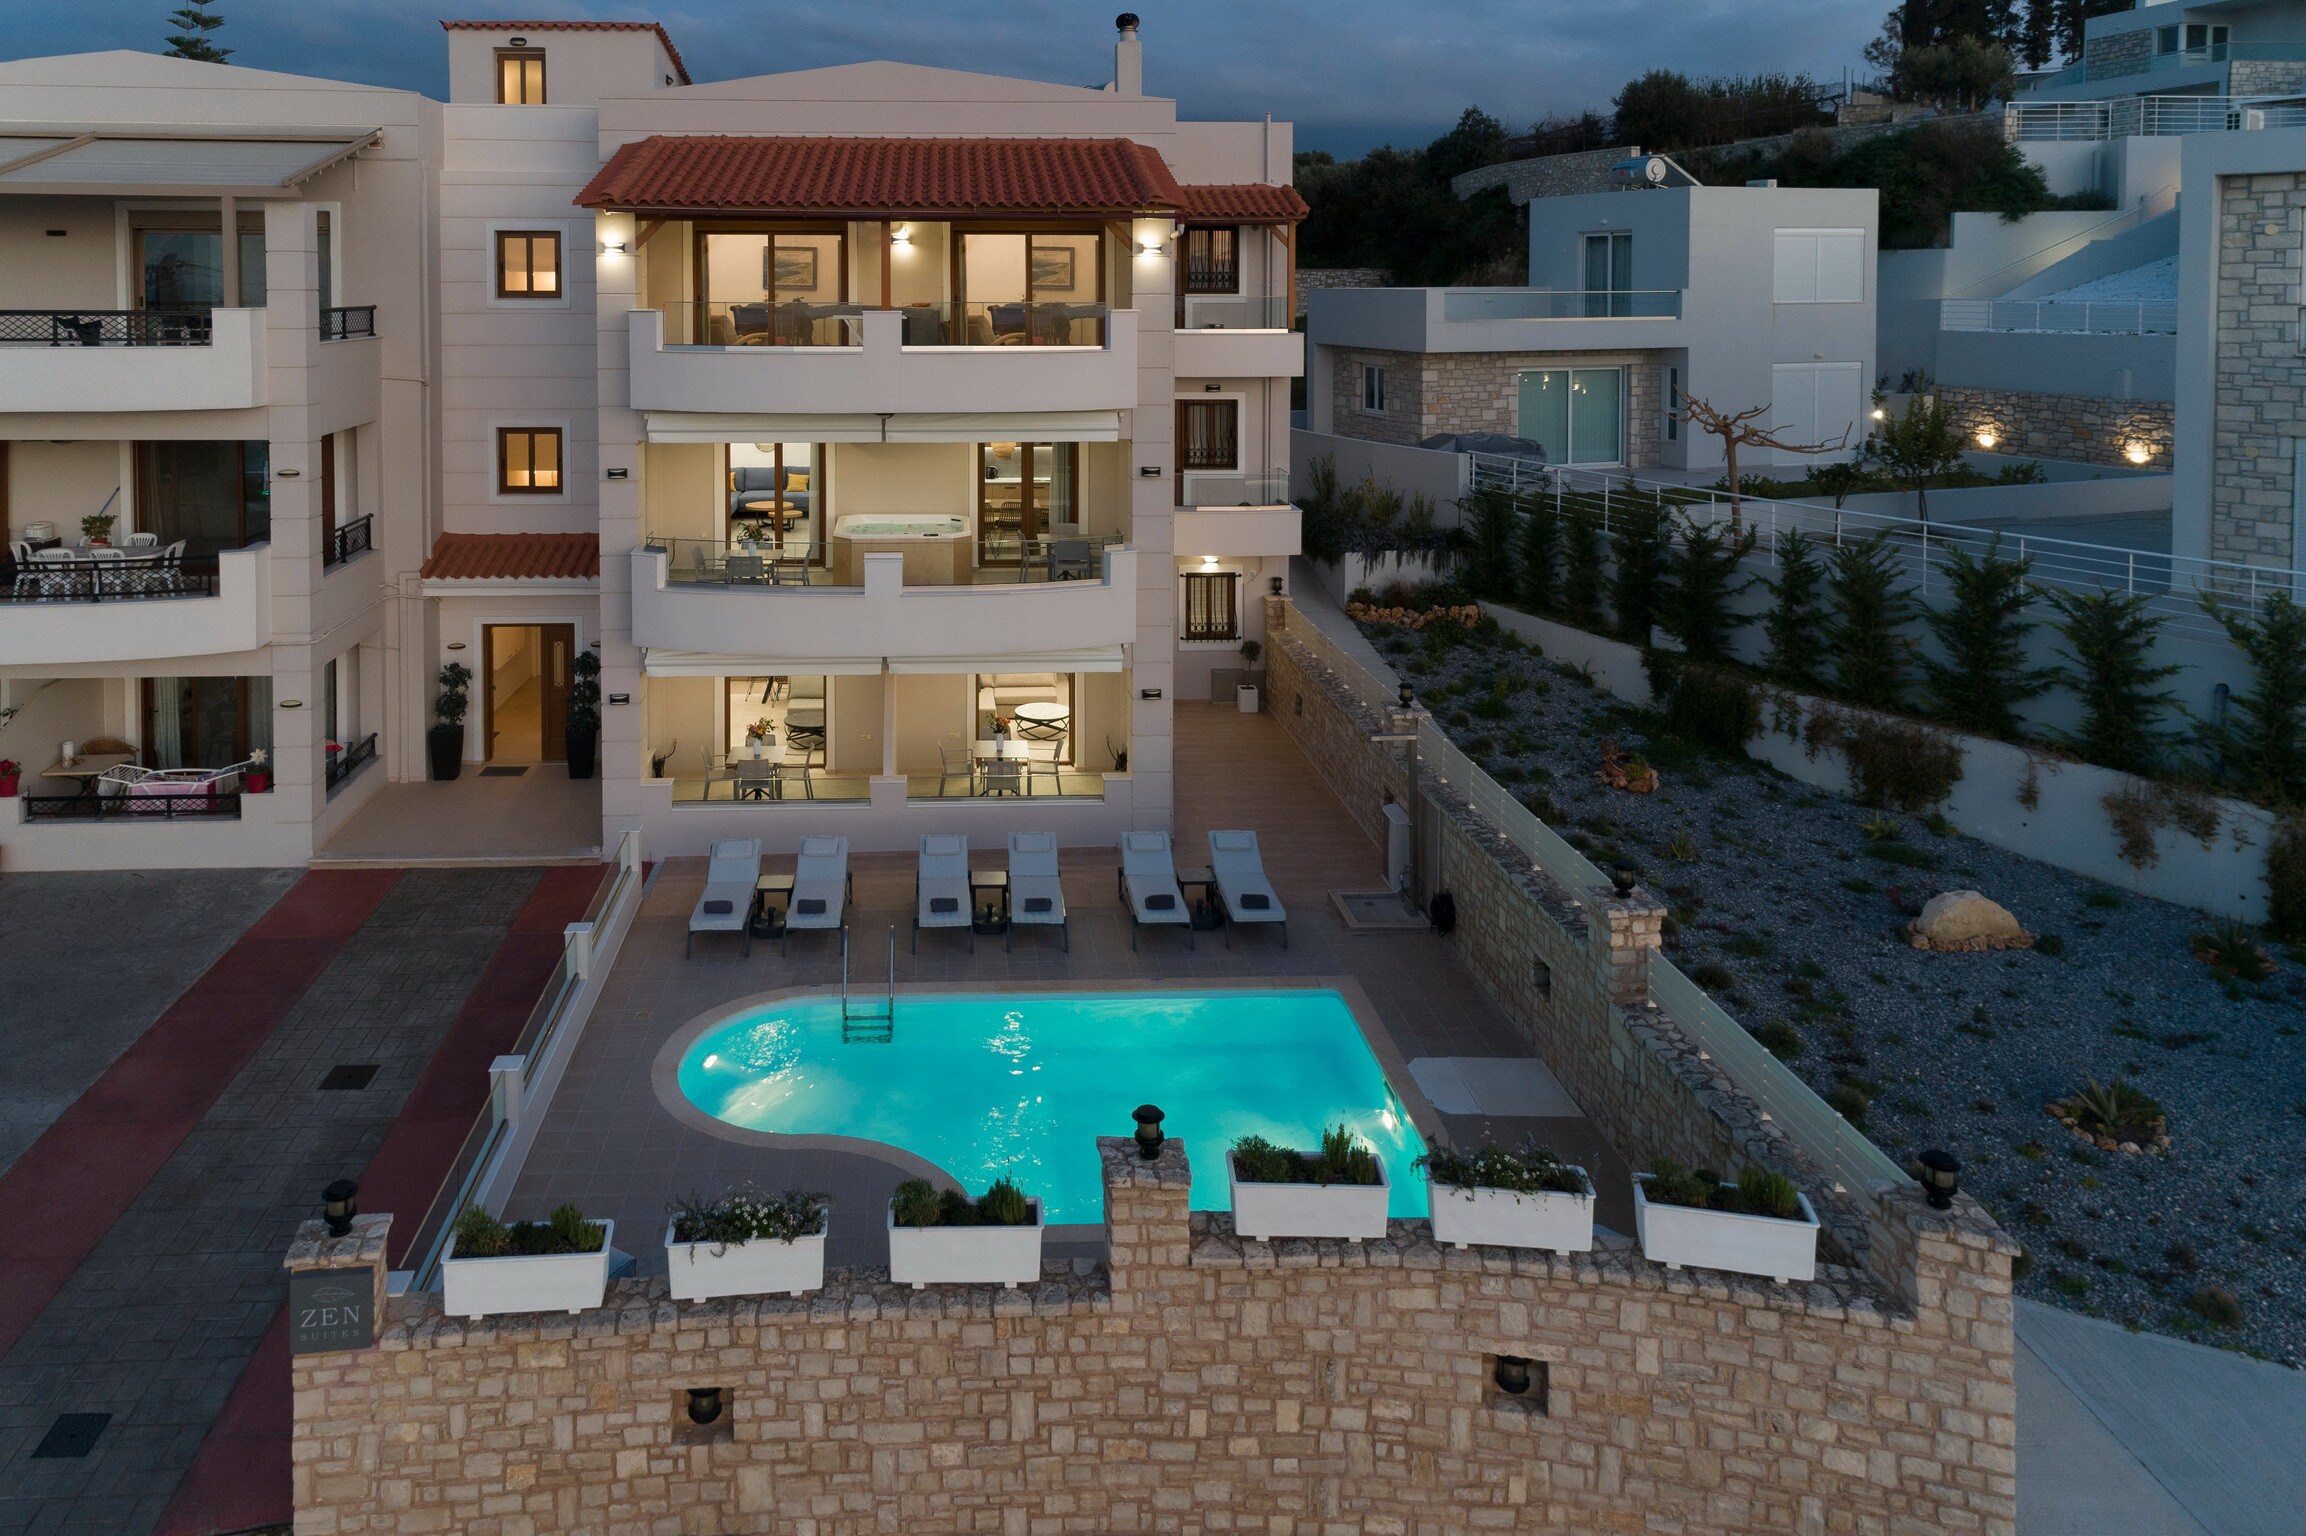 Exterior view of Fully equipped apartment,Shared pool,Near beach,tavern,supermarket,Nea Magnissia,Rethymno,Crete